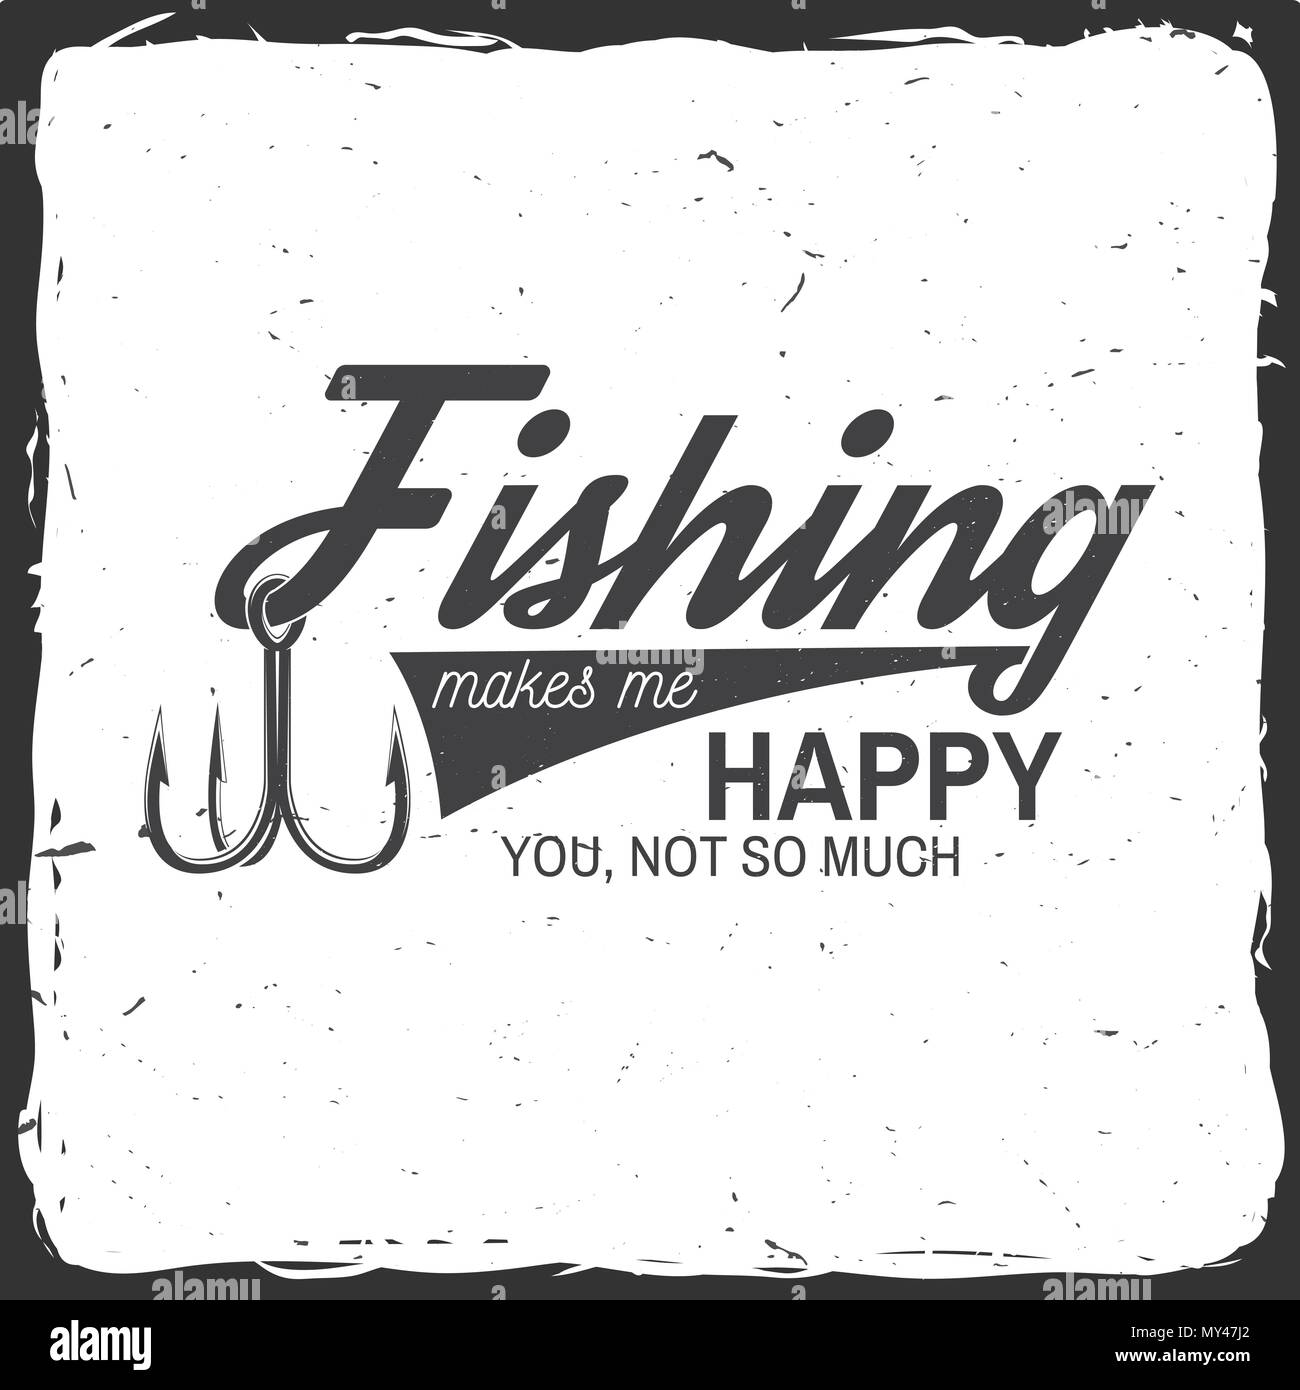 https://c8.alamy.com/comp/MY47J2/fishing-makes-me-happy-you-not-so-much-vector-illustration-concept-for-shirt-or-logo-print-stamp-or-tee-vintage-typography-design-with-fish-hook-MY47J2.jpg